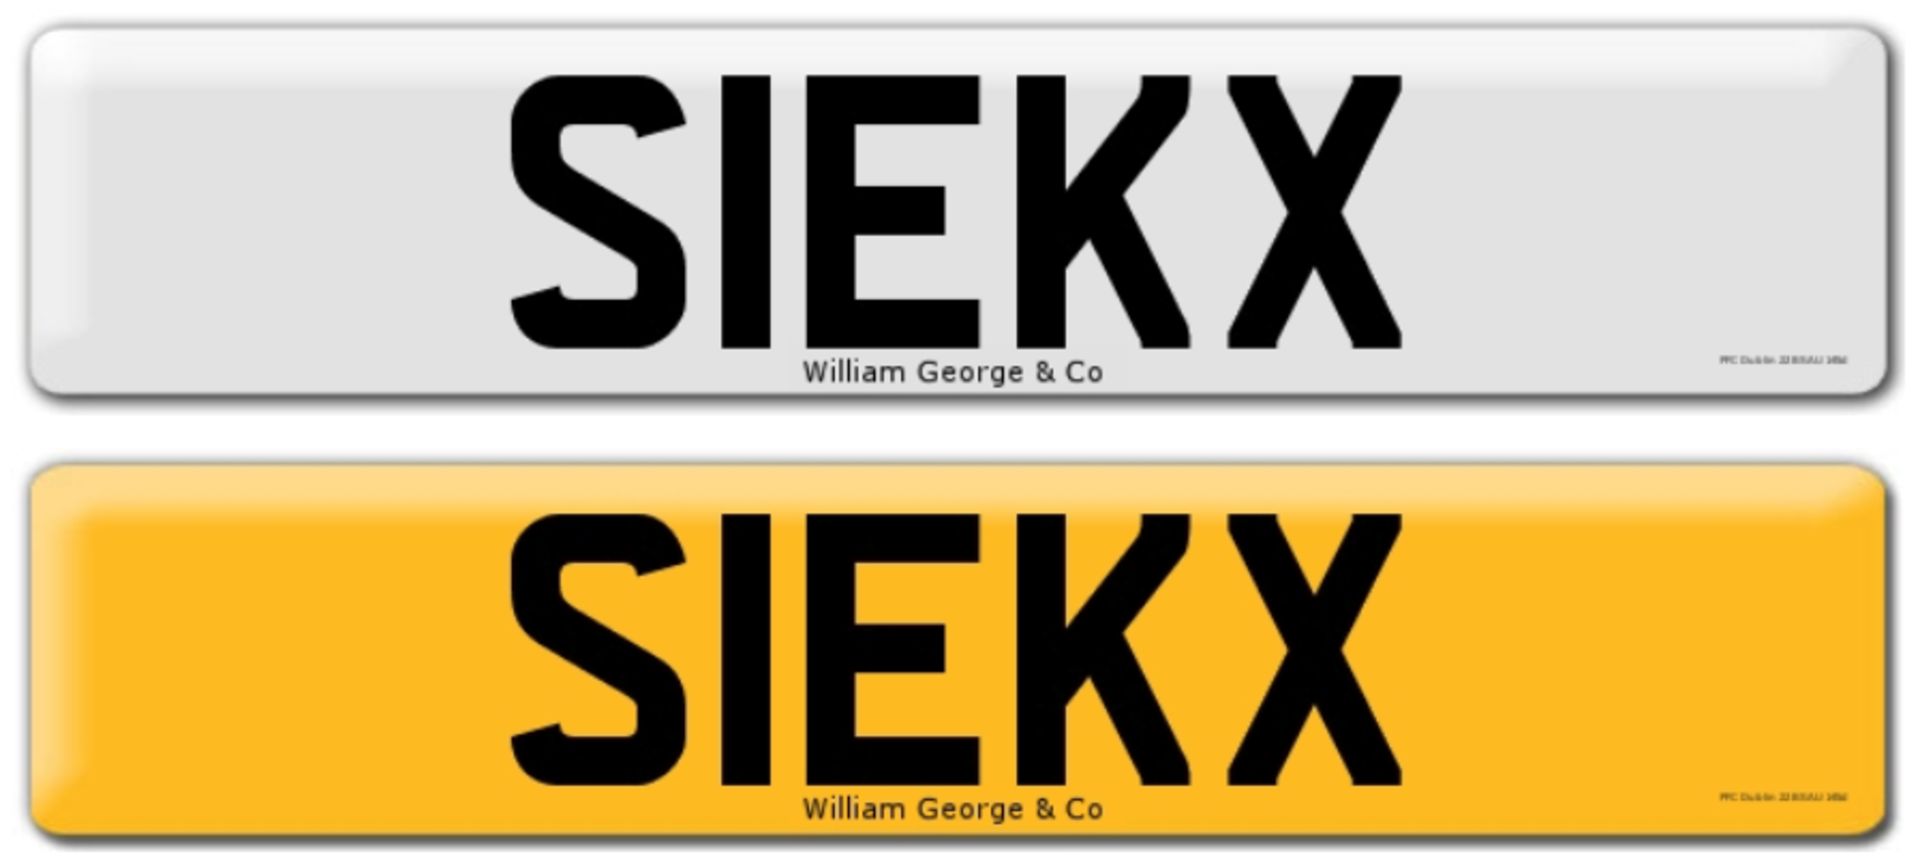 Registration on DVLA retention certificate, ready to transfer S1EKX, This number plate /